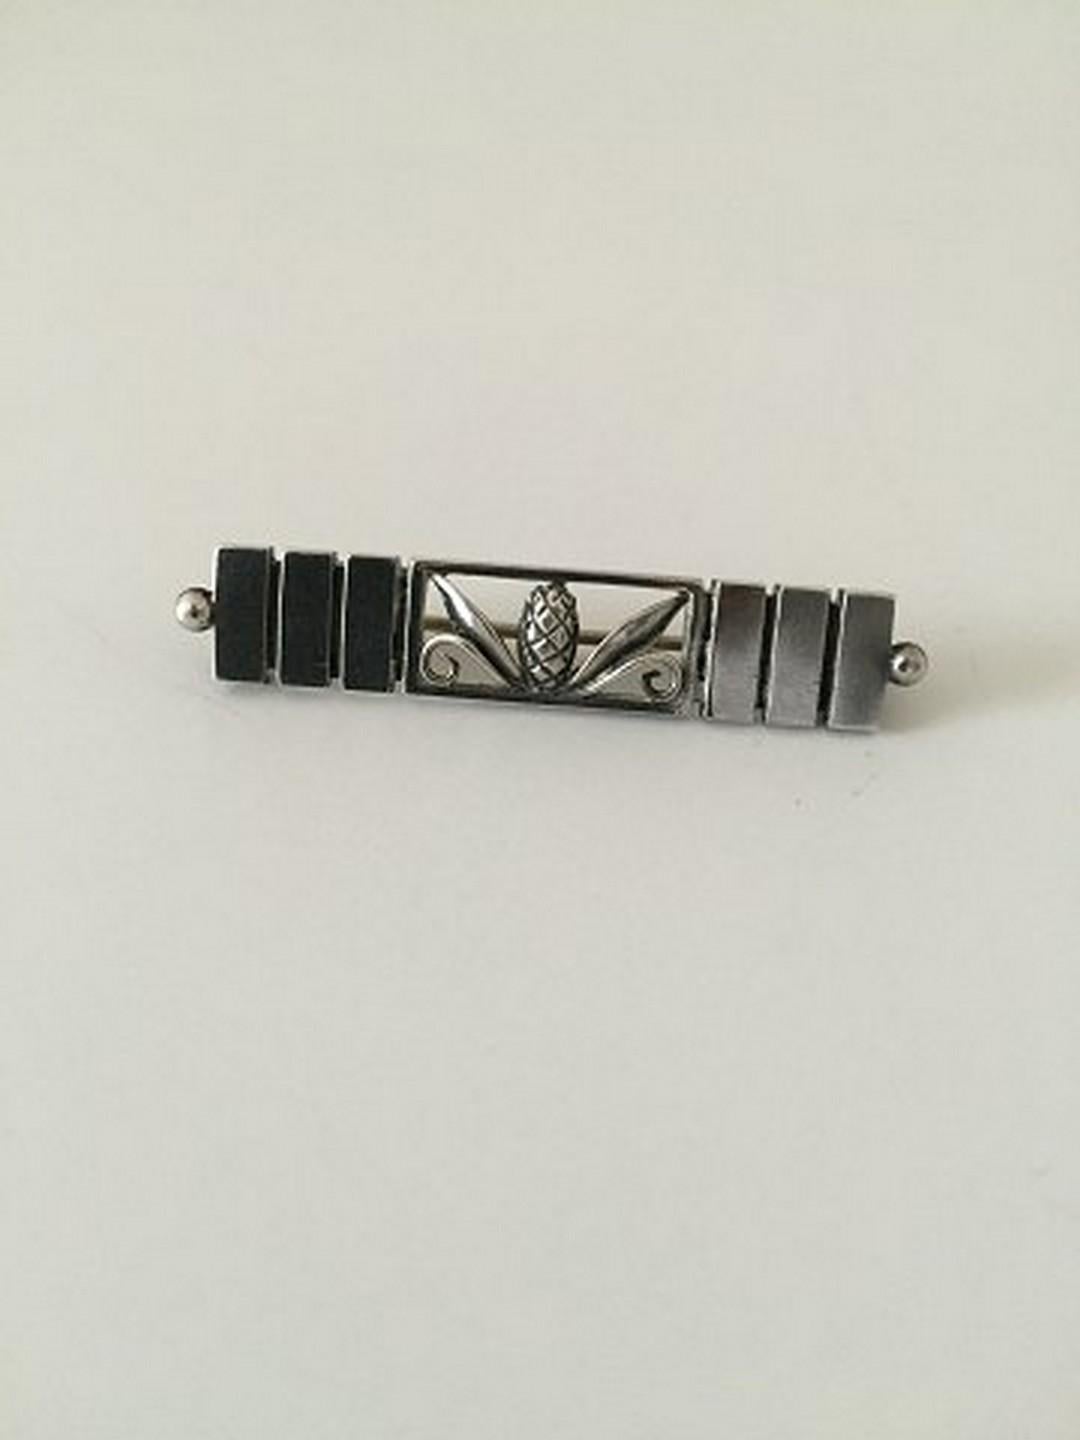 Georg Jensen Sterling Sølv Brooch No 216A. Measures 4.6 cm / 1 49/64 in. and is in good condition. With 1933-1944 marks. Weighs 5 g / 0.17 oz.